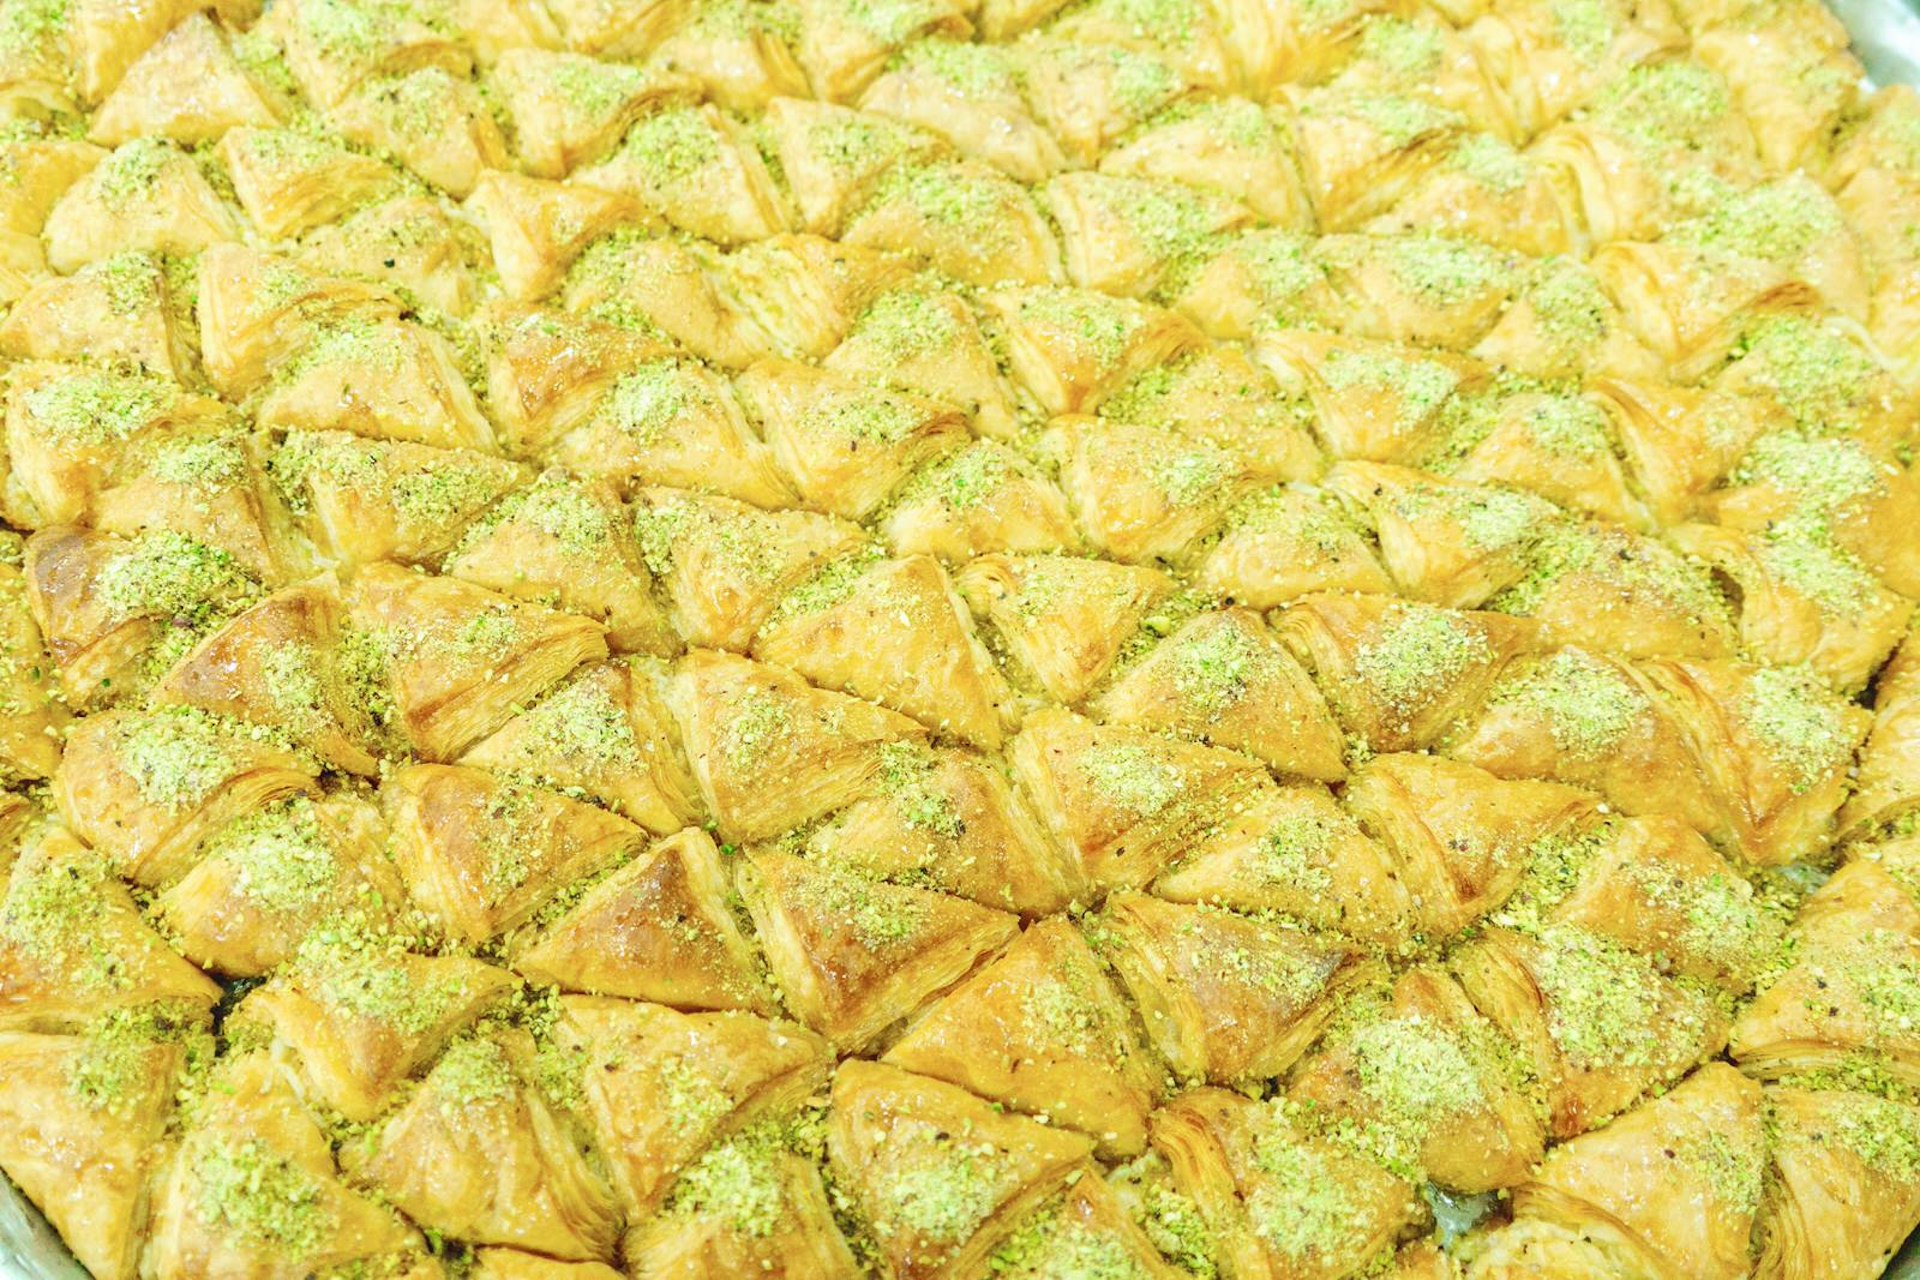 Freshly made baklava at the Nafeeseh bakery is a welcome sight. Image by Yulia Denisyuk / Lonely Planet